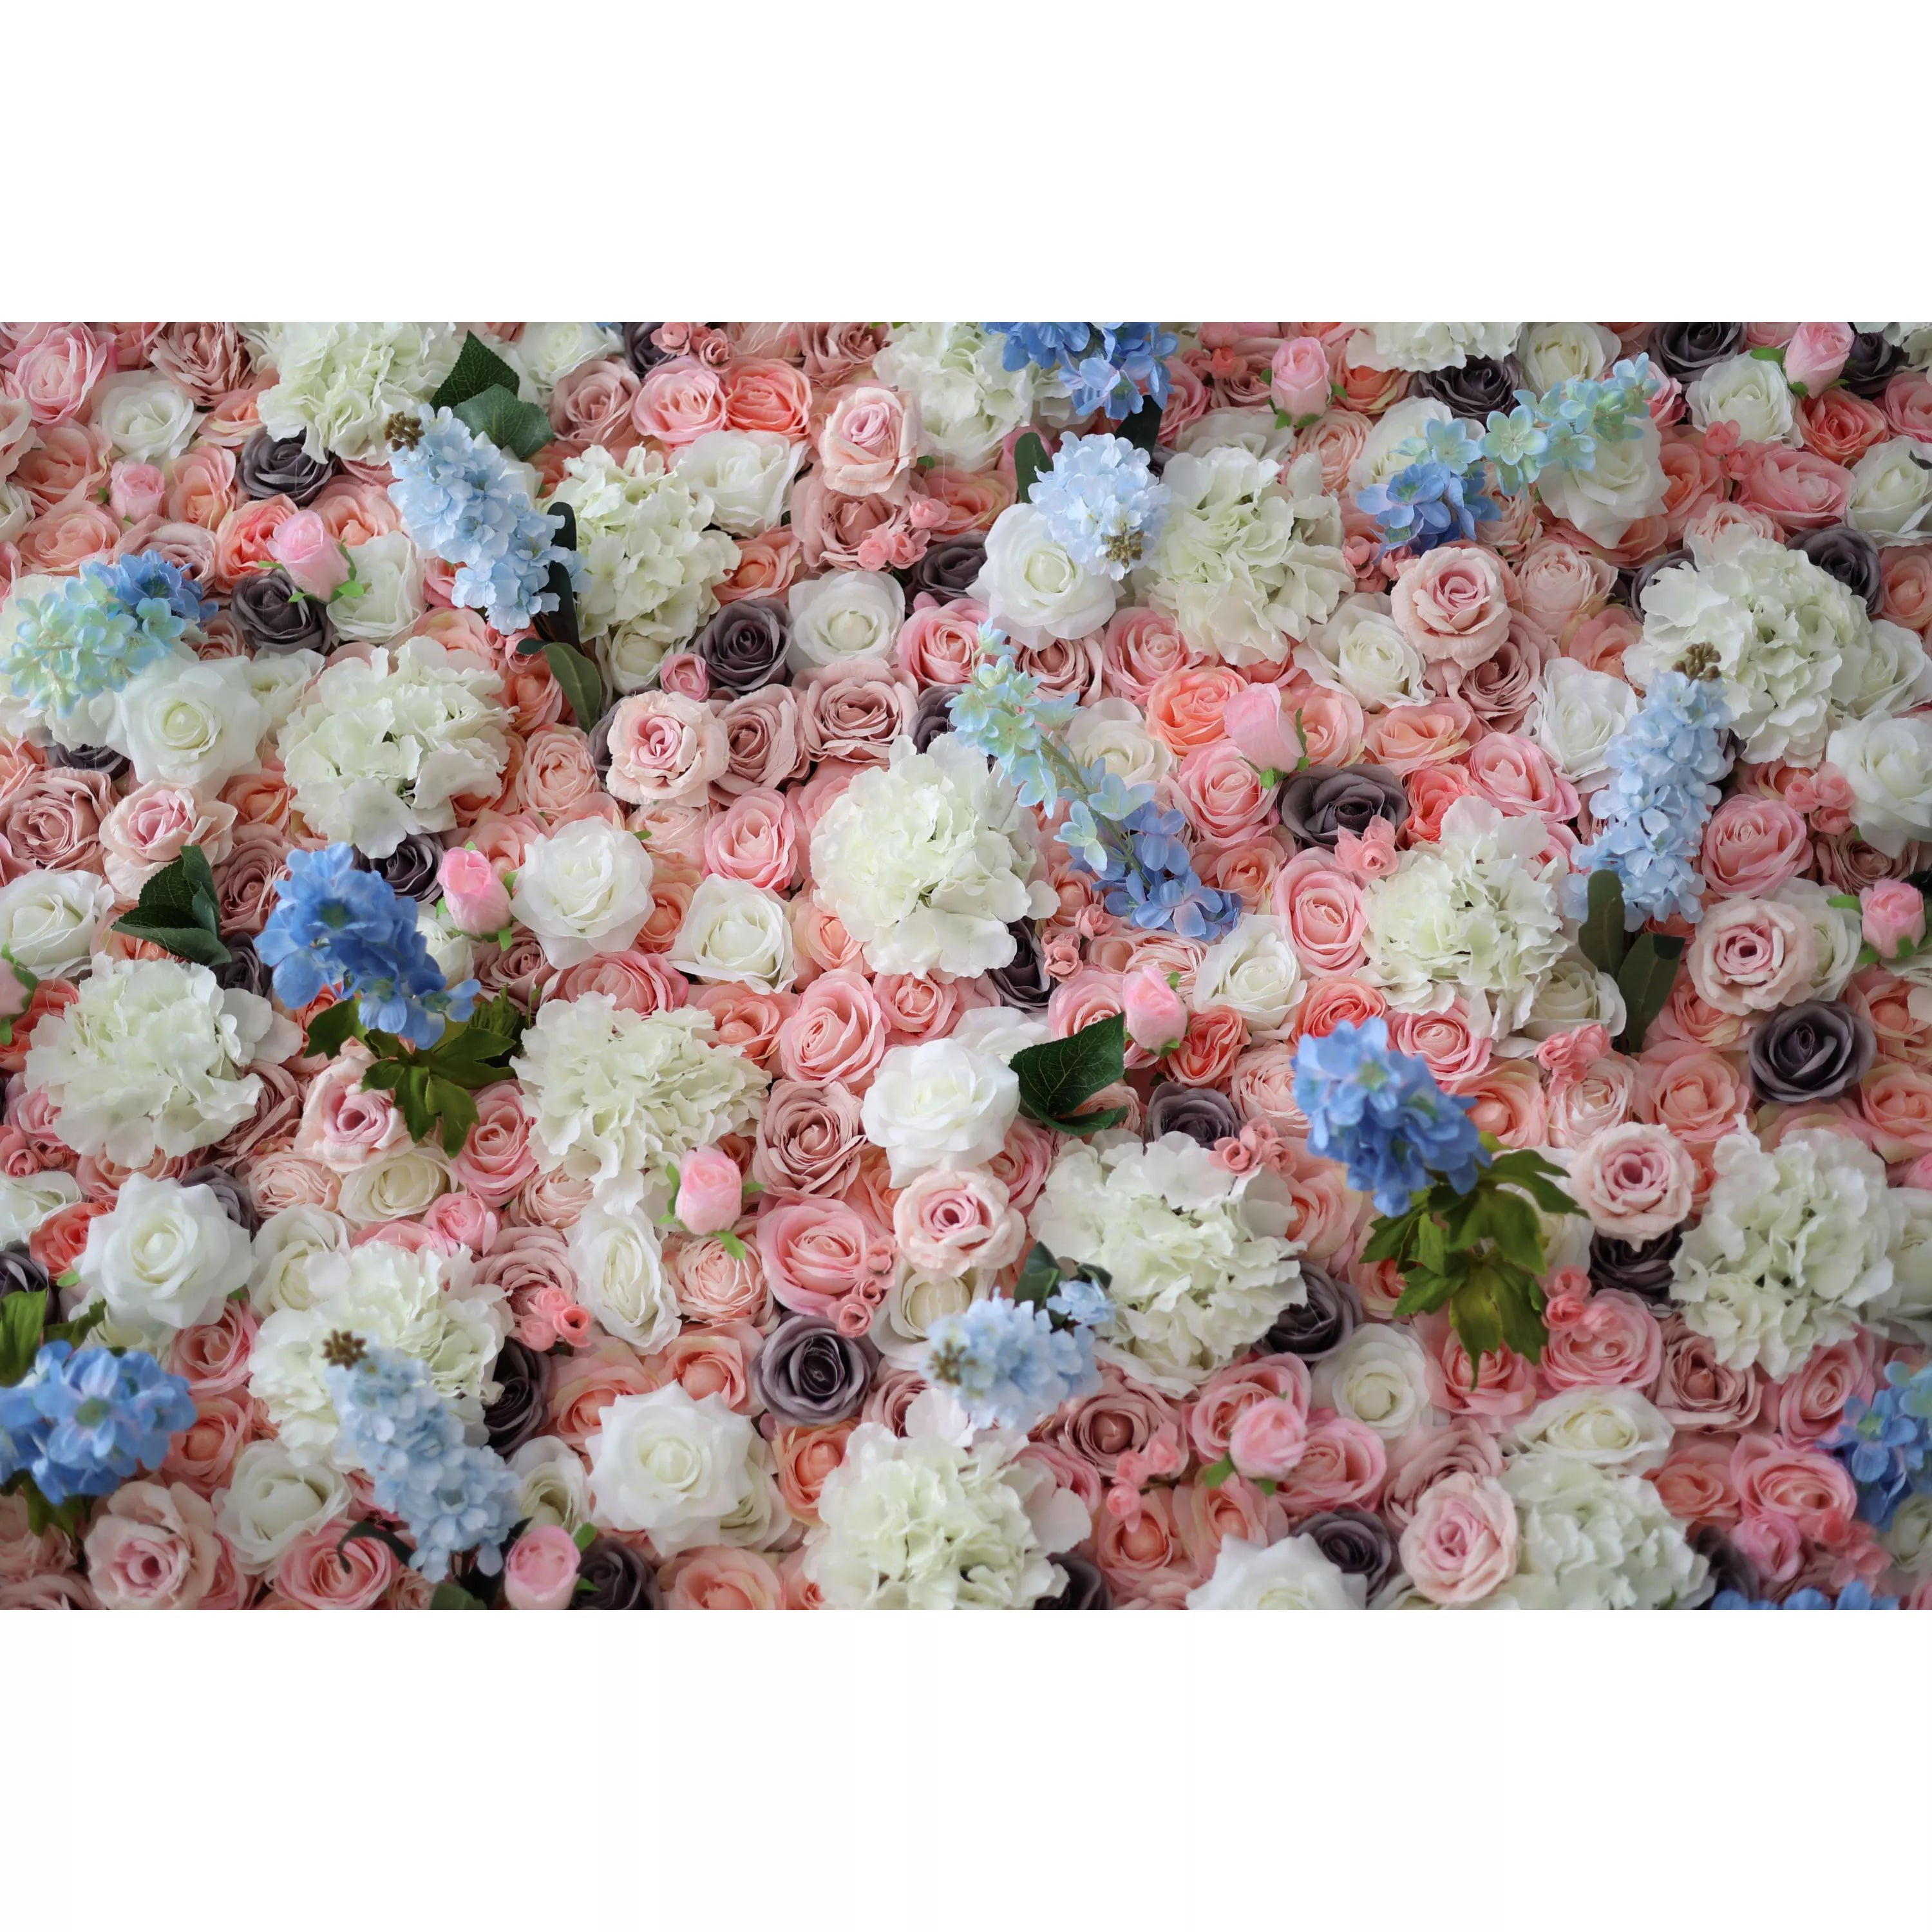 Valar Flowers roll up fabric artificial flower wall for wedding backdrop, floral party decor, and event photography, model VF-1284